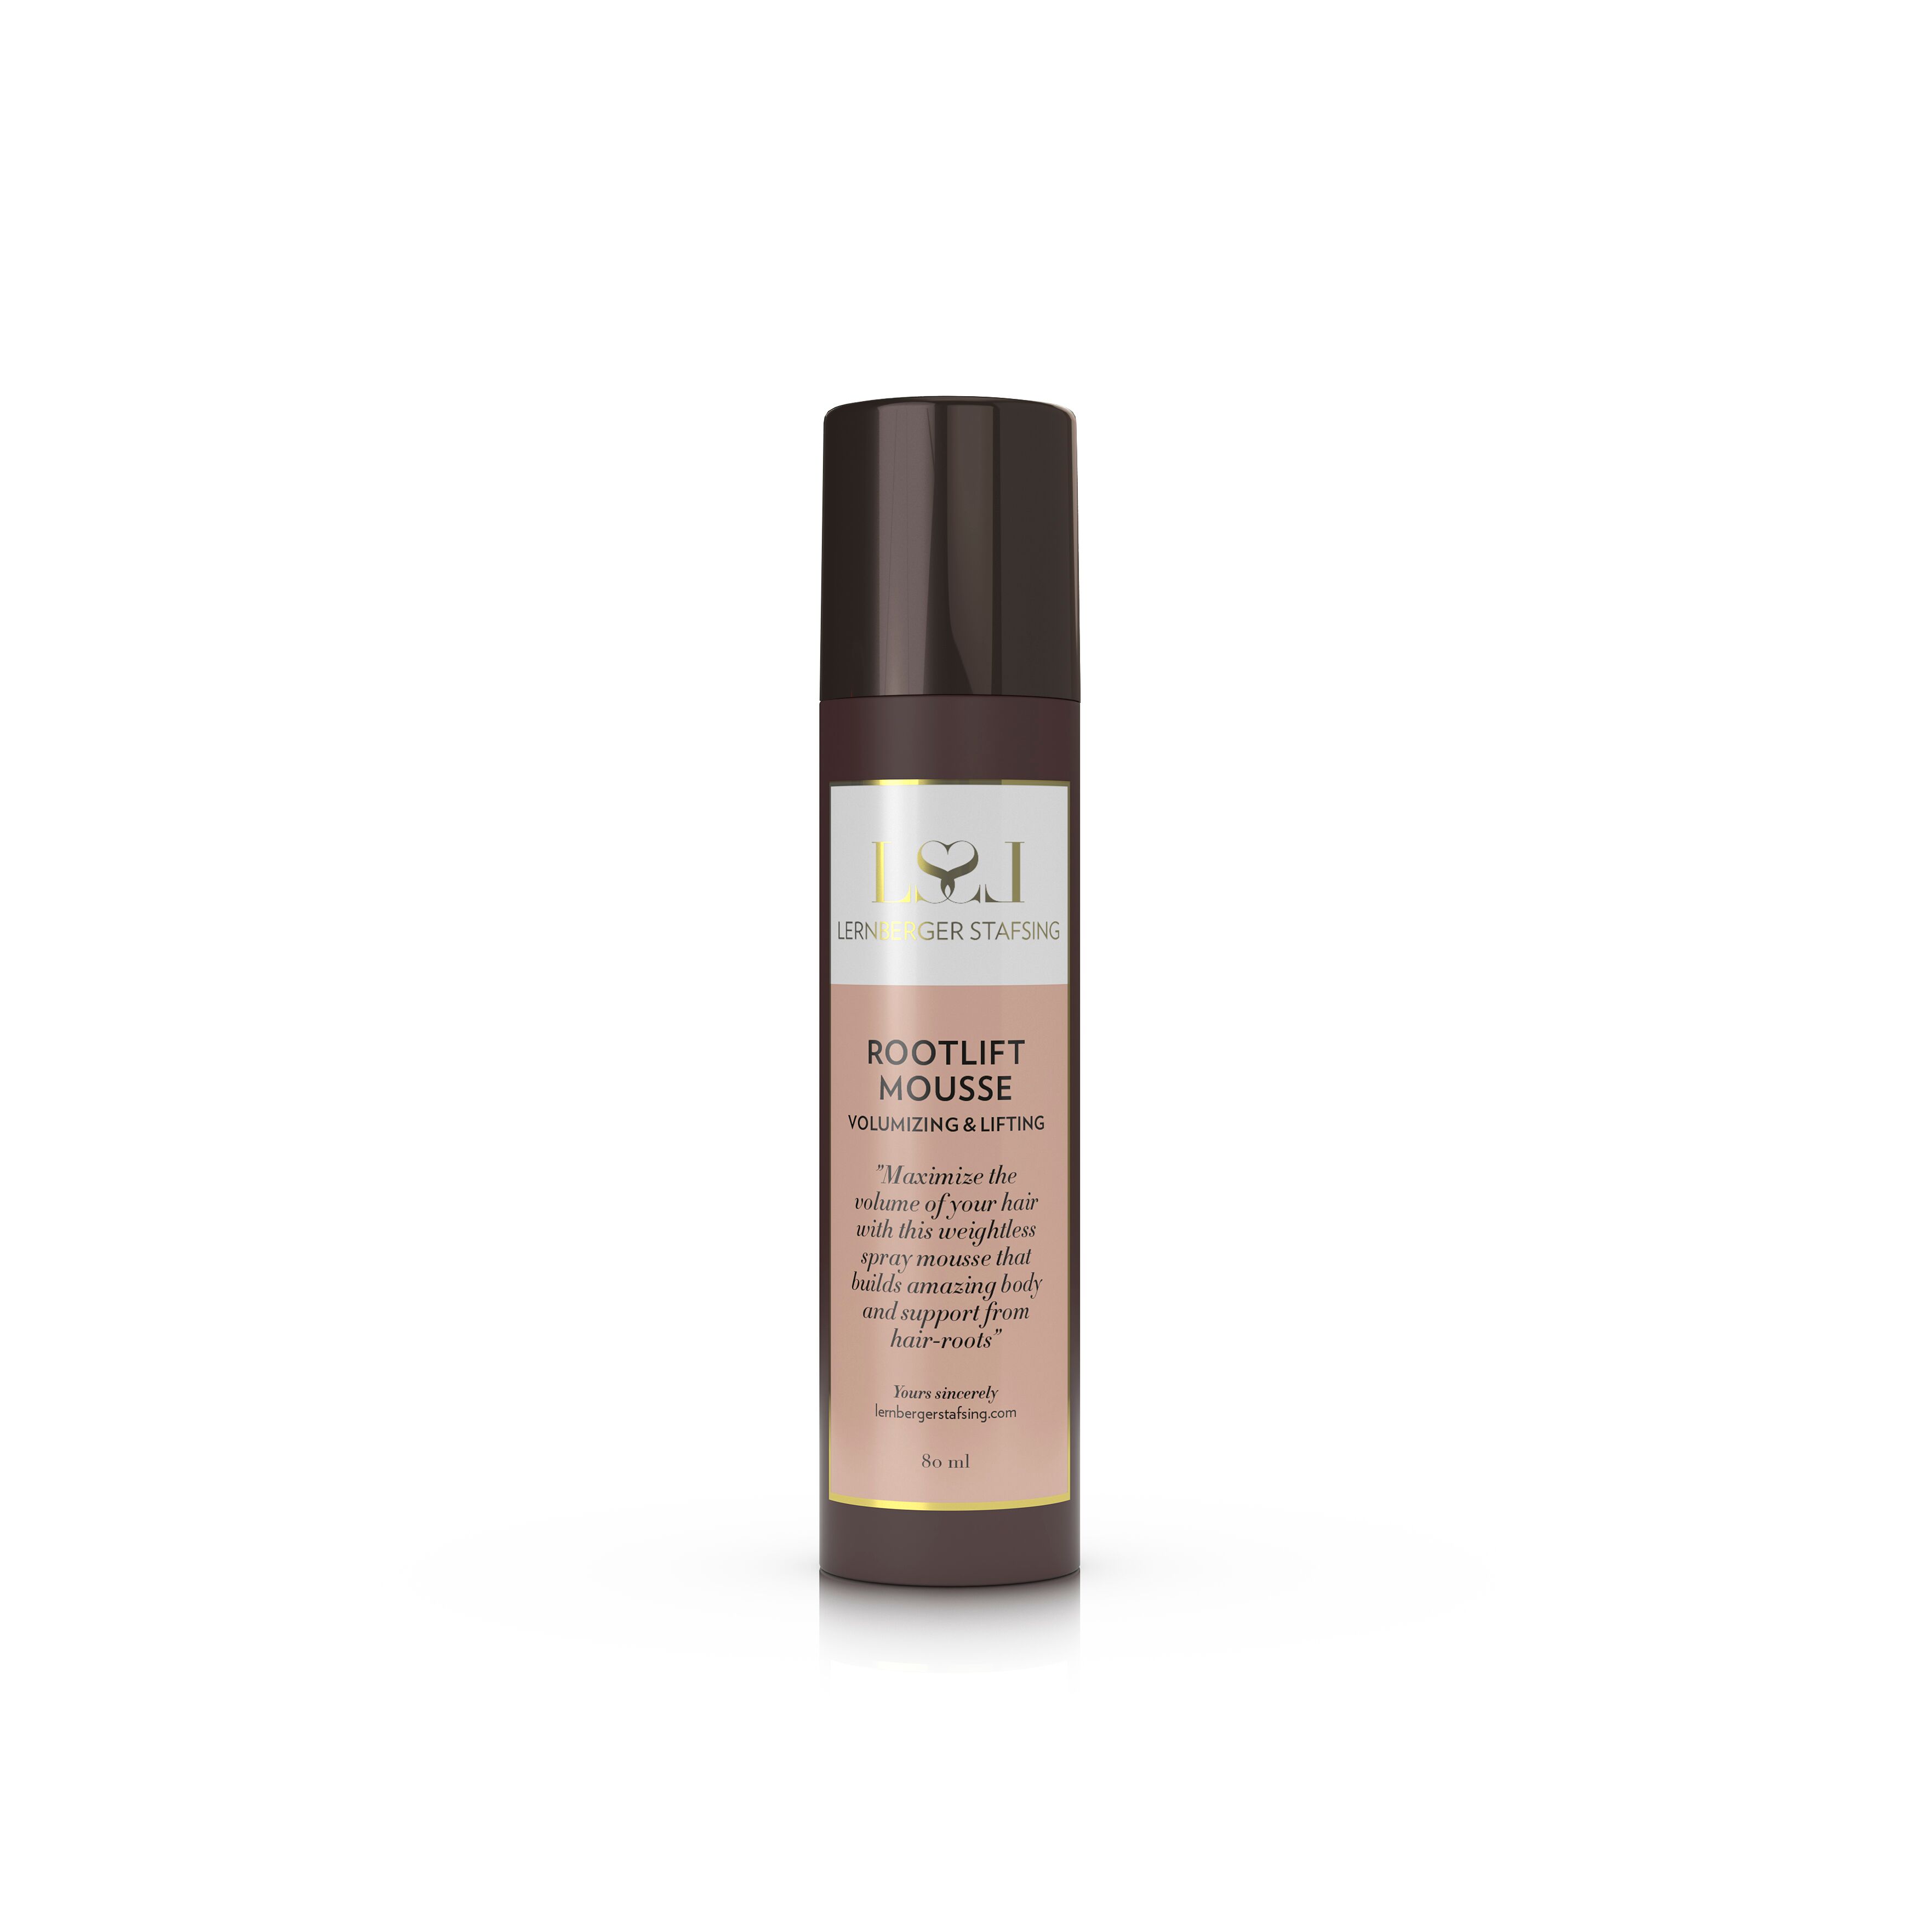  Rootlift Mousse Travel Size